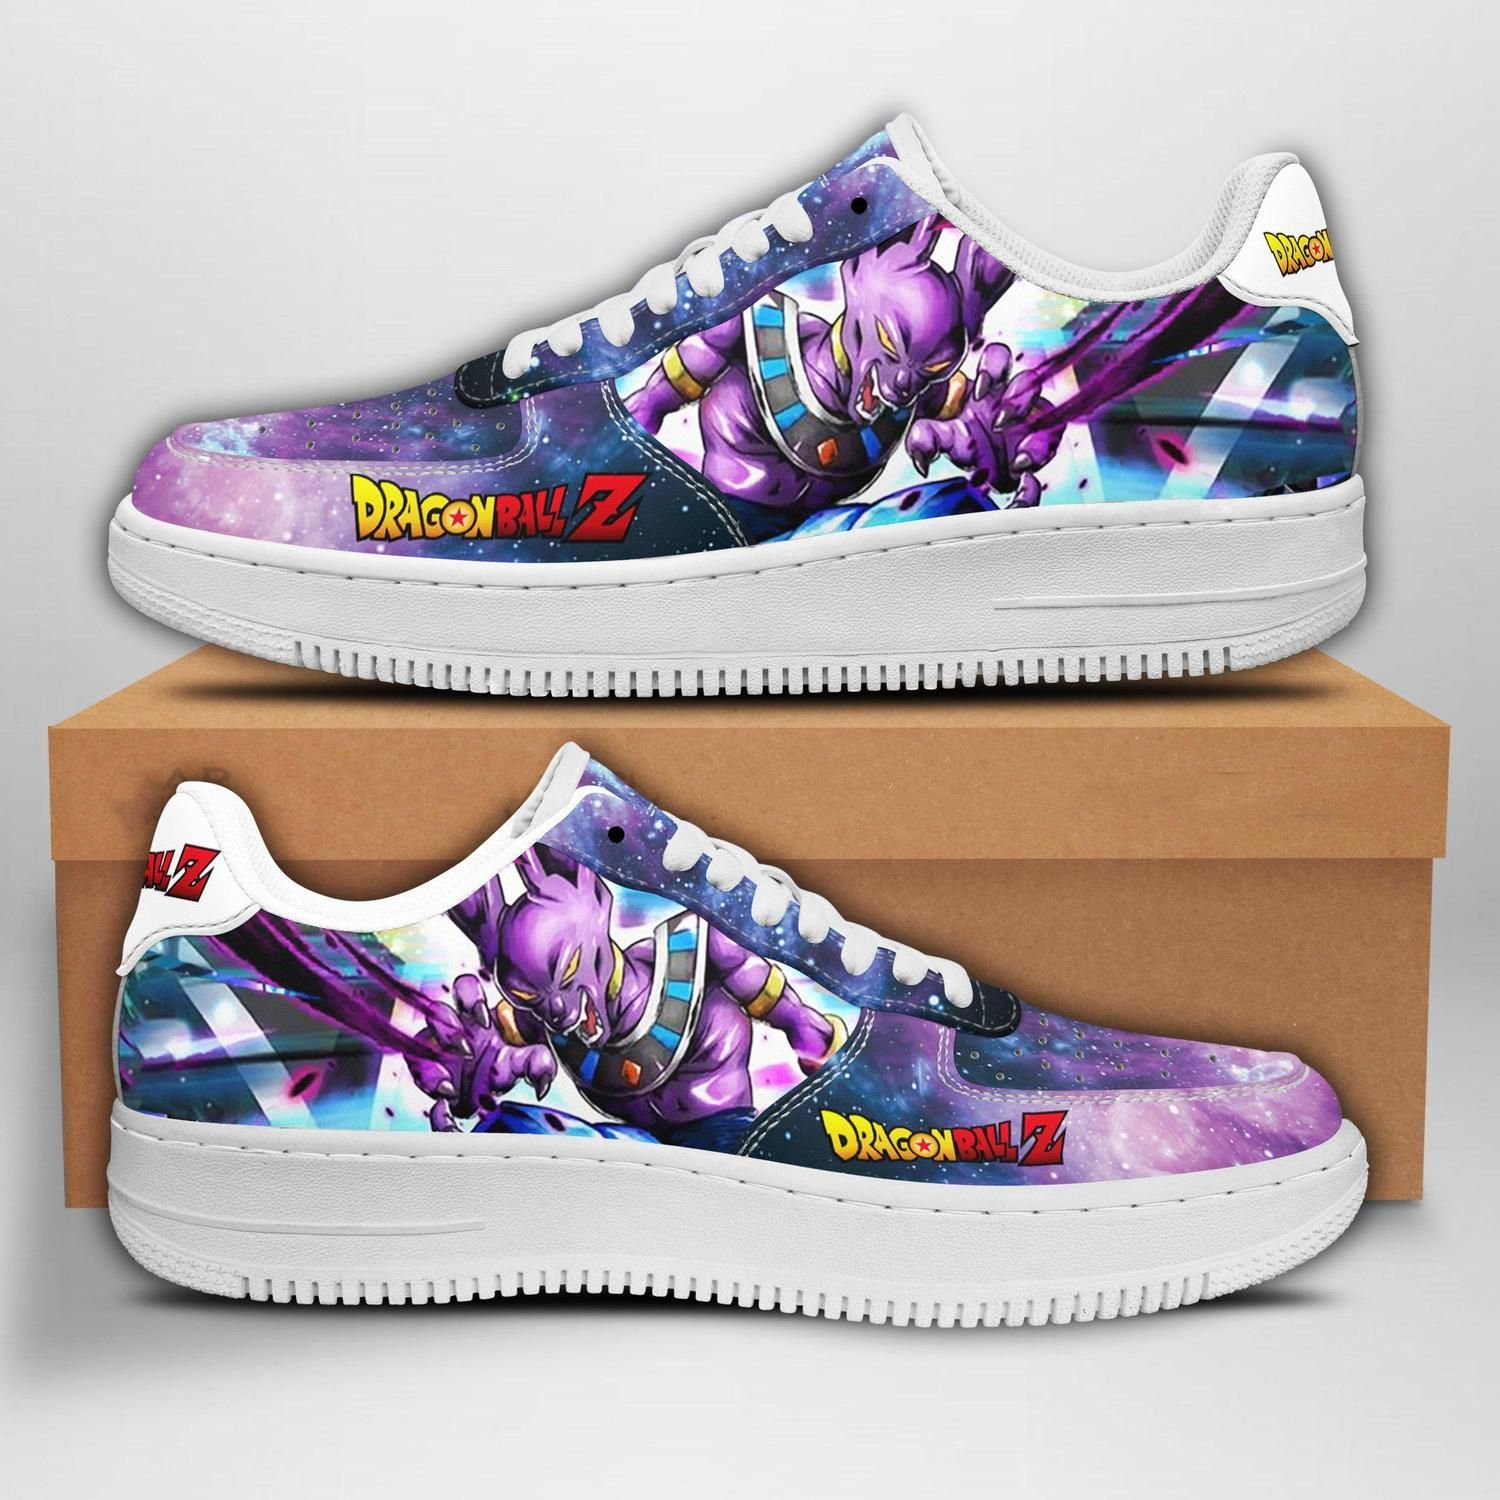 Luxury Beerus Dragon Ball Z Air Force 1 Sneaker Shoes